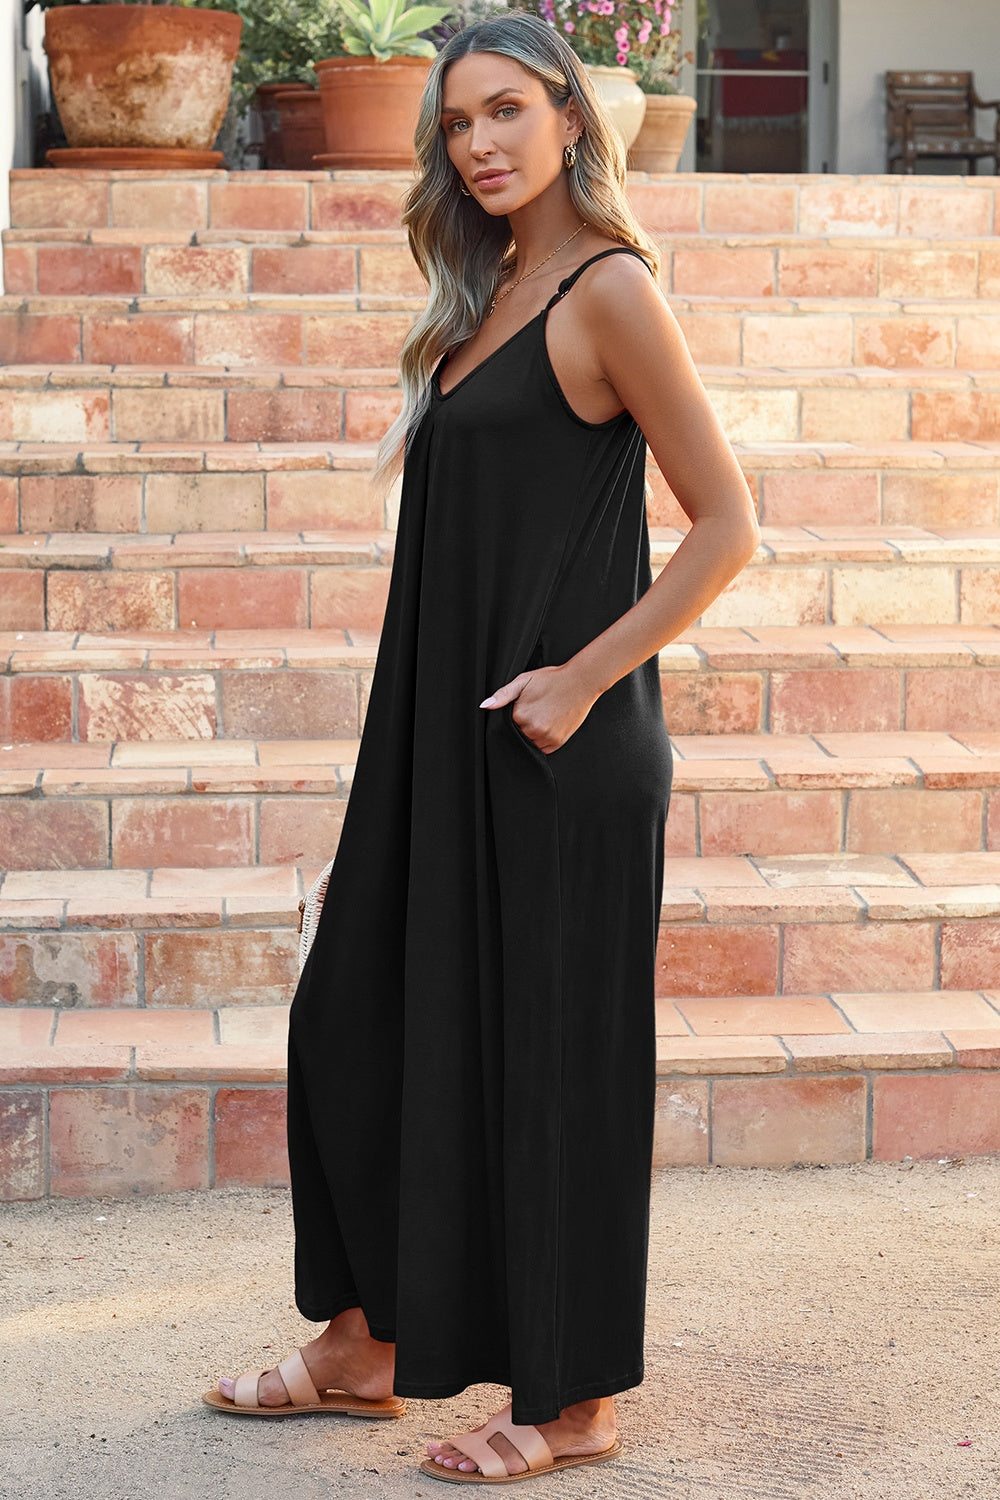 Elevate your style effortlessly with our V-Neck Spaghetti Strap Jumpsuit. Versatile, chic, and comfortable. Available in black and matcha green